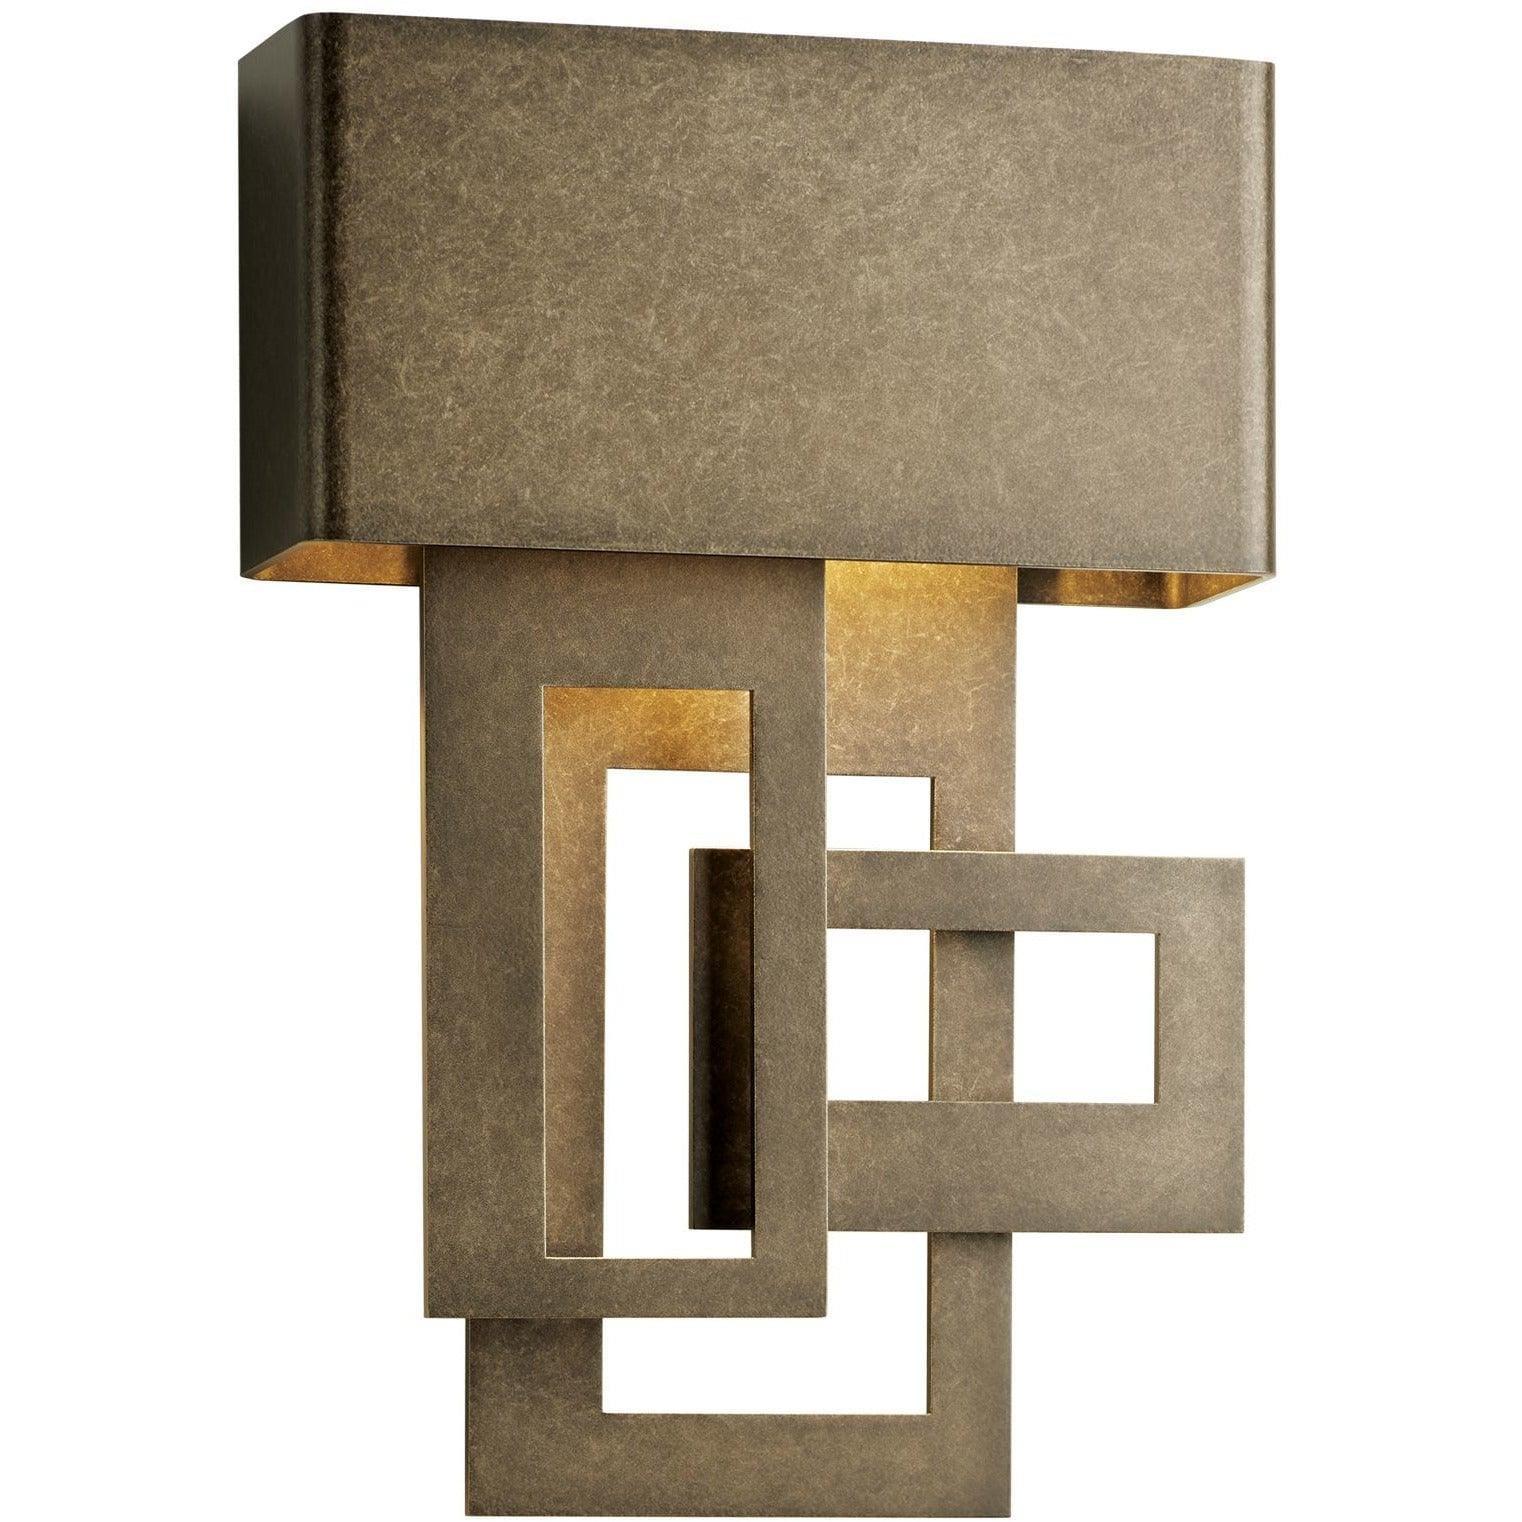 Hubbardton Forge - Collage 13-Inch LED Outdoor Wall Sconce - 302520-LED-LFT-77 | Montreal Lighting & Hardware